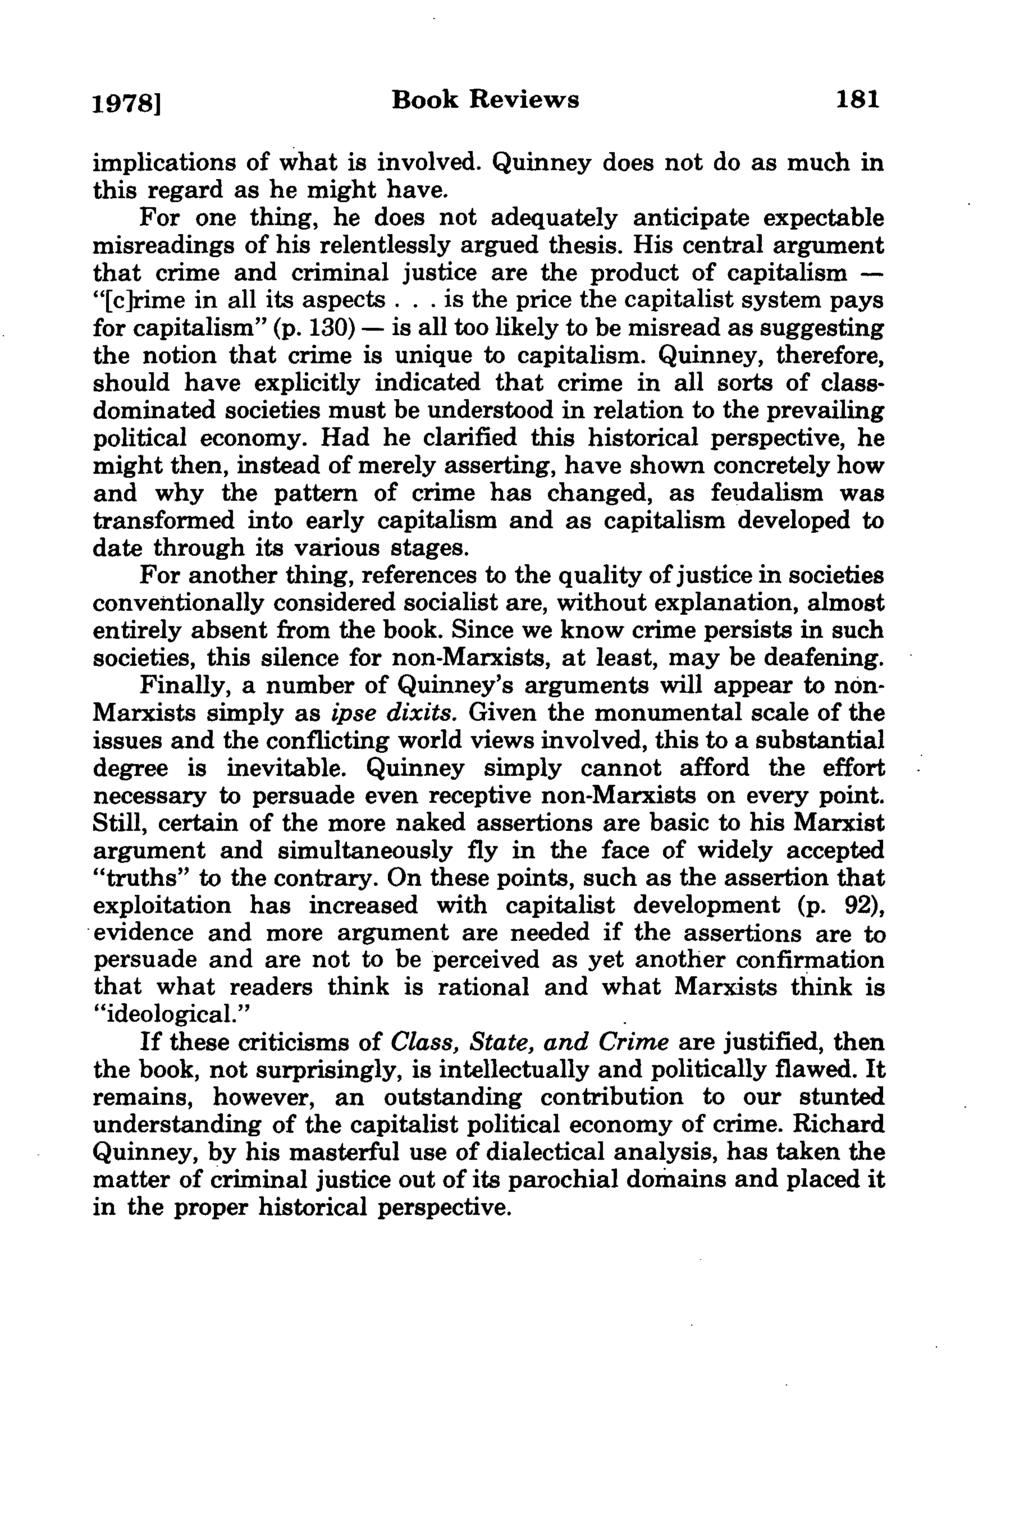 1978] Book Reviews implications of what is involved. Quinney does not do as much in this regard as he might have.